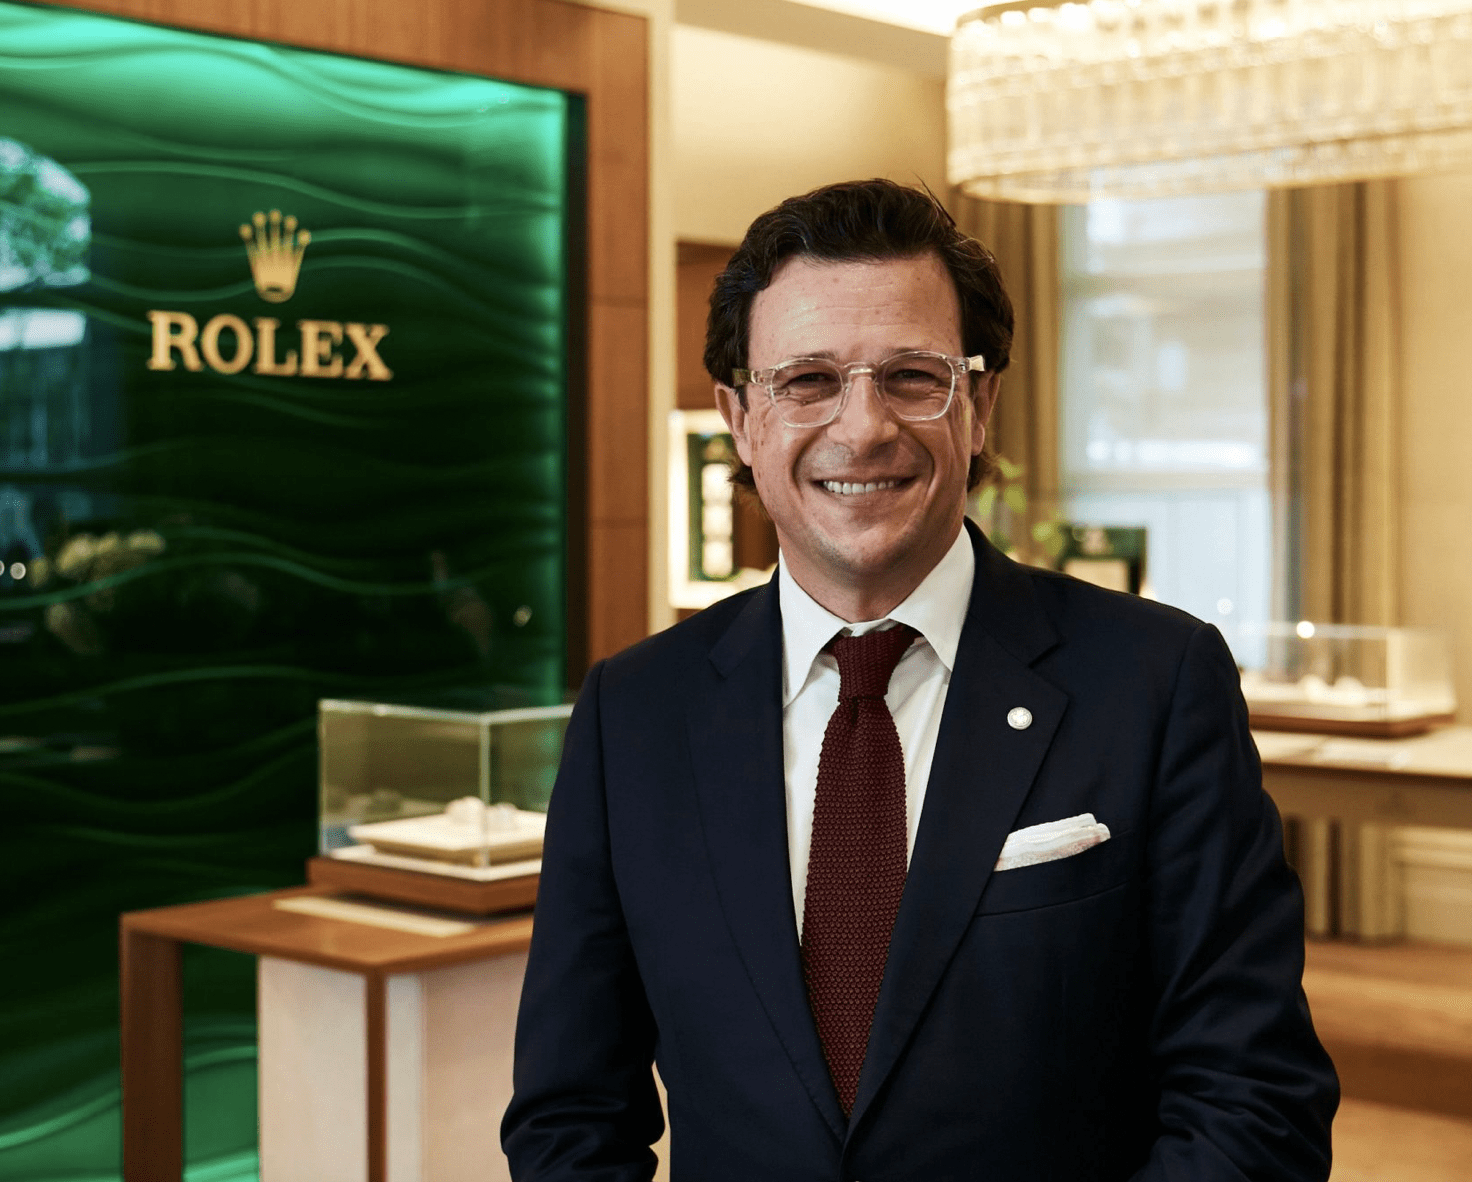 Former Australasian head of Rolex Patrick Boutellier opens Rolex Boutique in Melbourne CBD, invites customers to “come and tell your story”